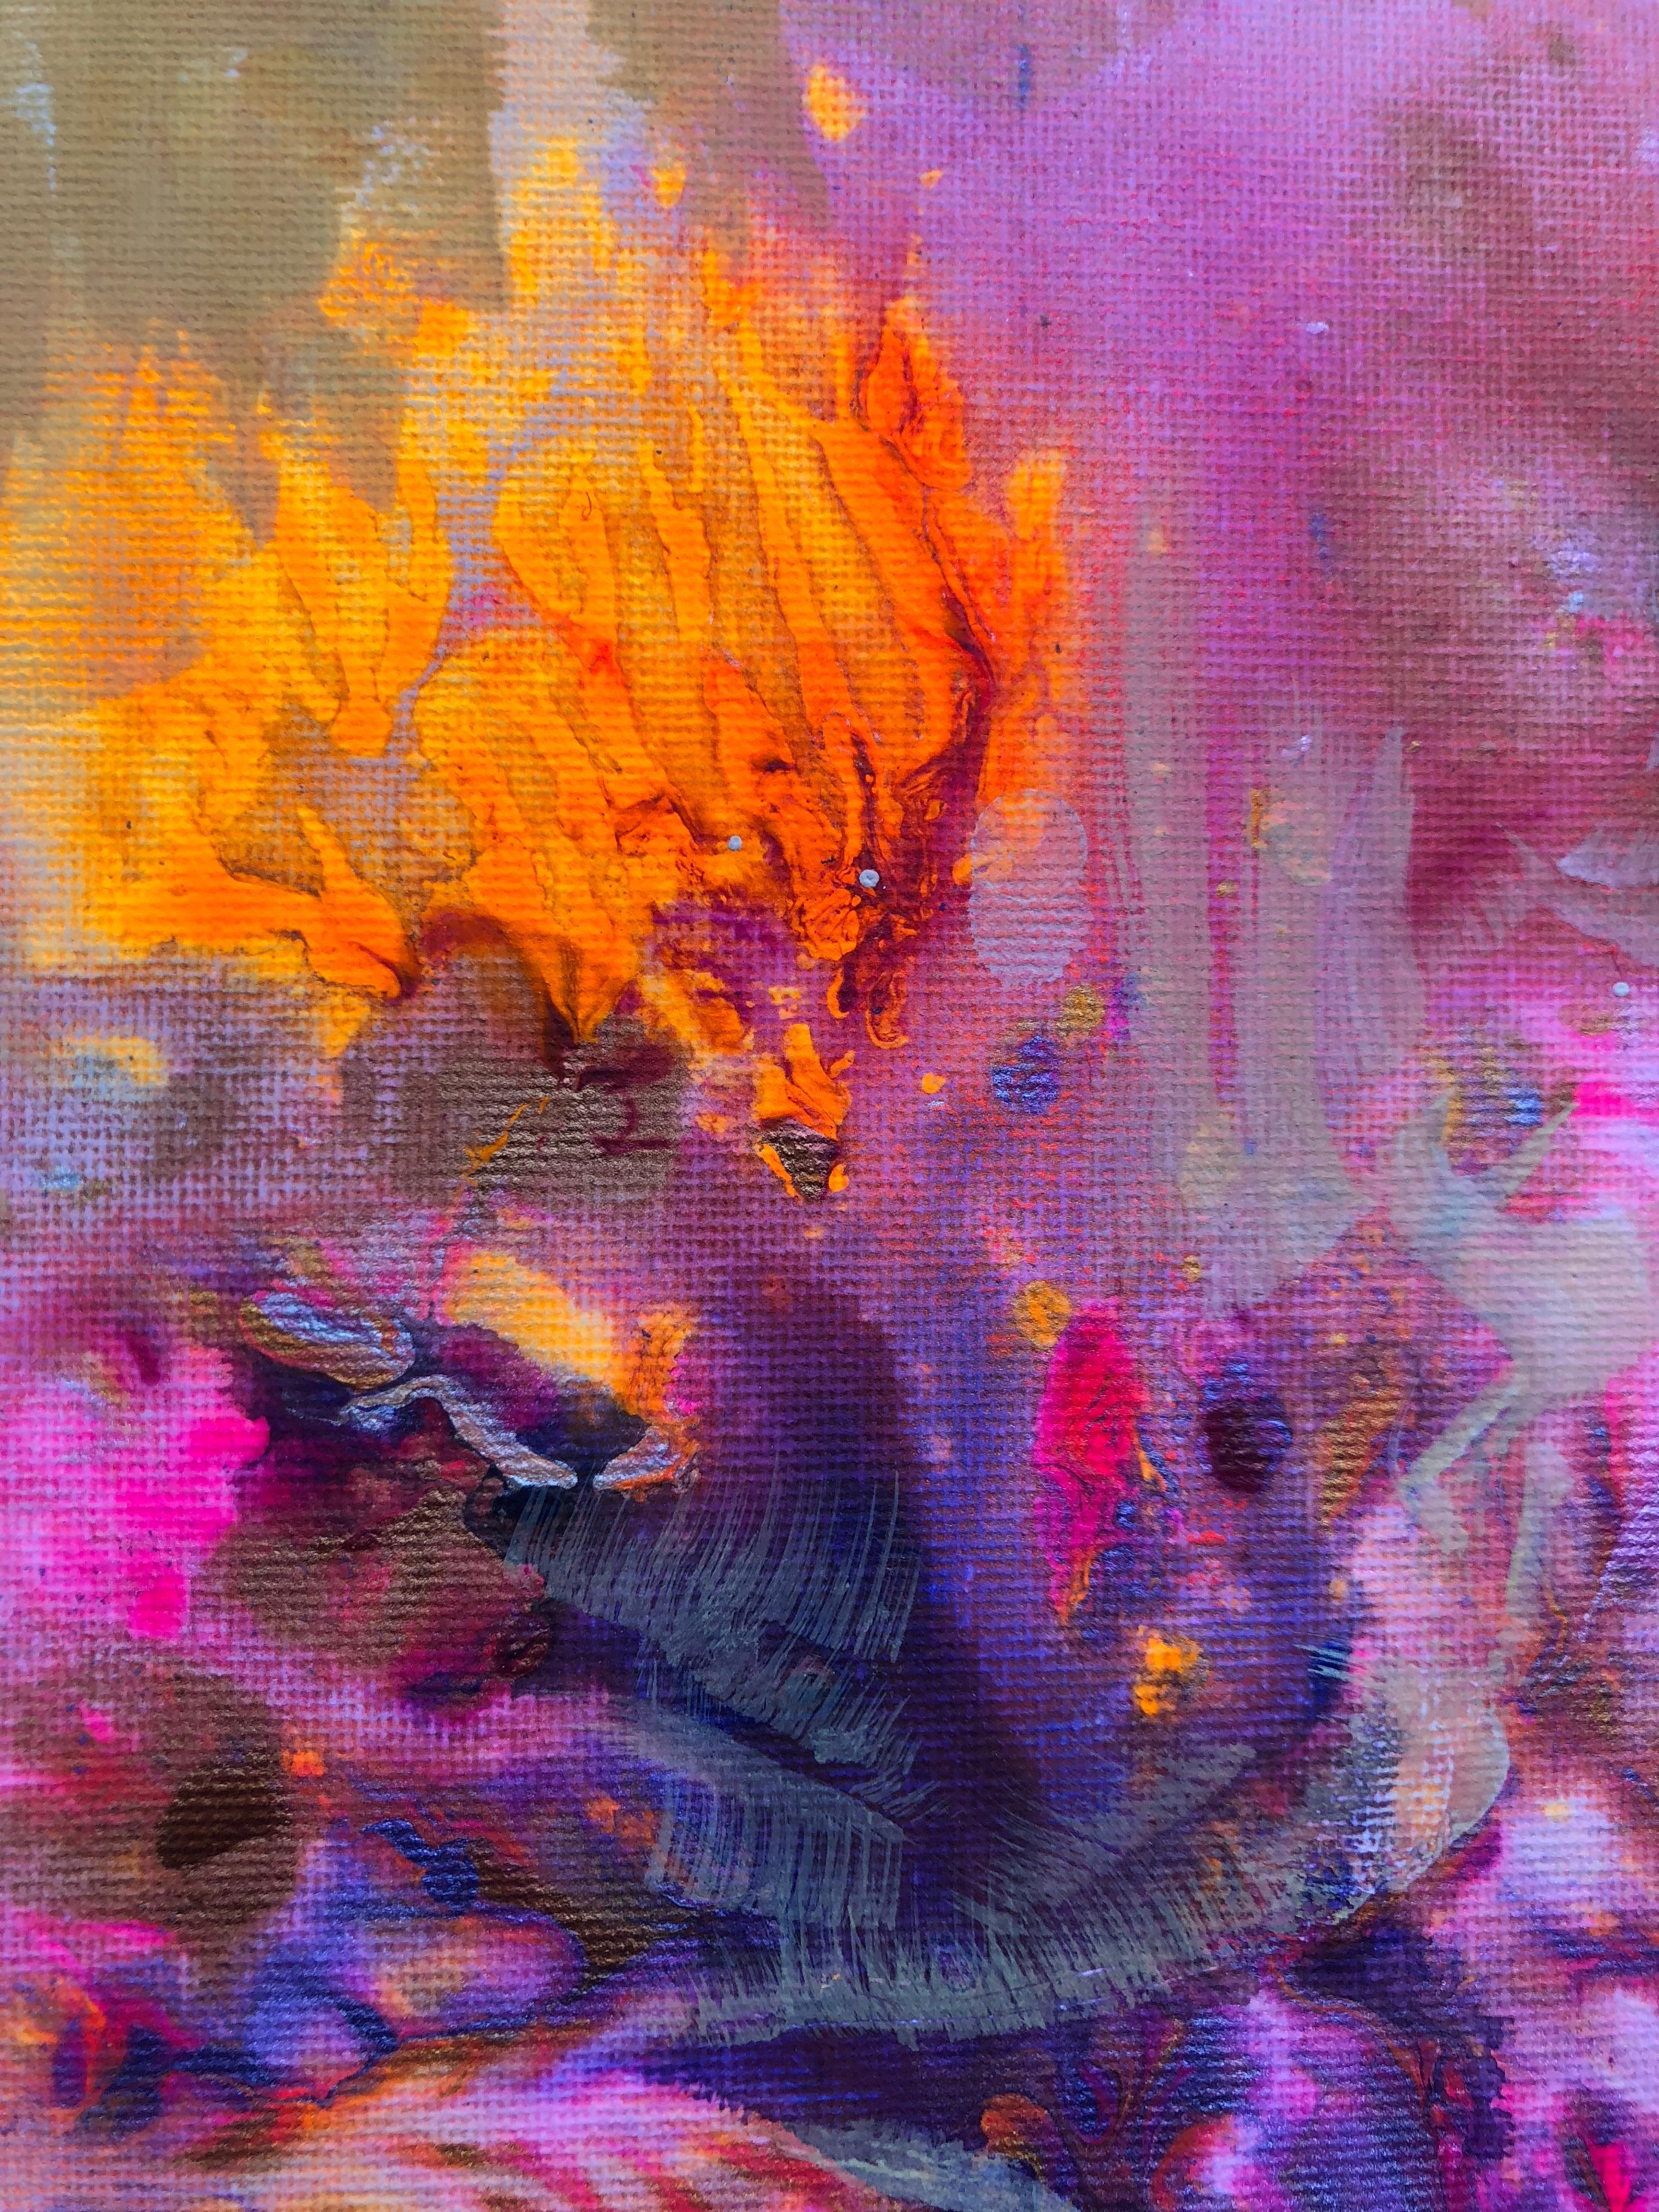 Contemporary art 21st century - painting on canvas - purple, orange, blue - Abstract Mixed Media Art by Volodymyr Zayichenko